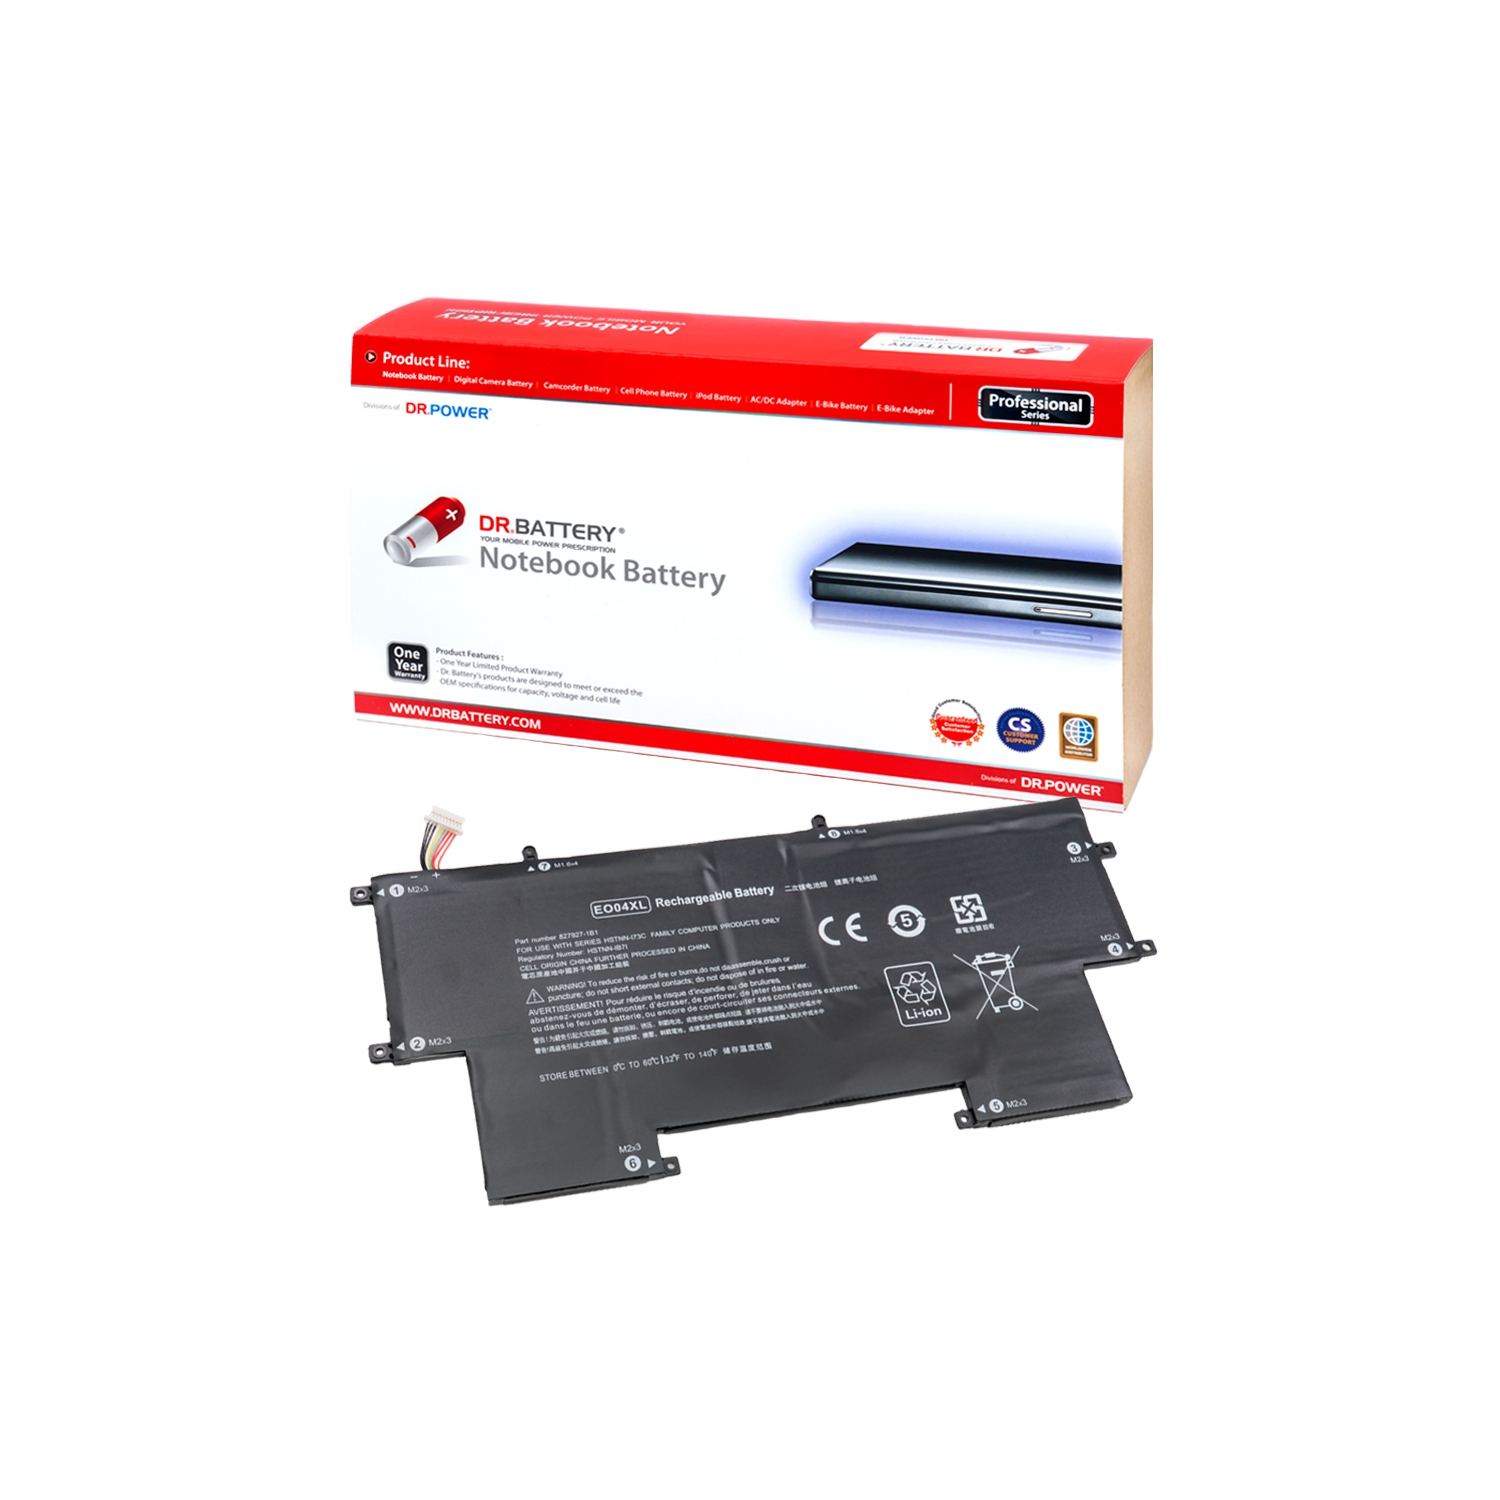 DR. BATTERY Replacement for HP EliteBook Folio G1 V1C37EA V1C39EA V1C40EA 827927-1C1 828226005 828226-005 E004XL [7.7V / 32Wh] **Free Shipping**